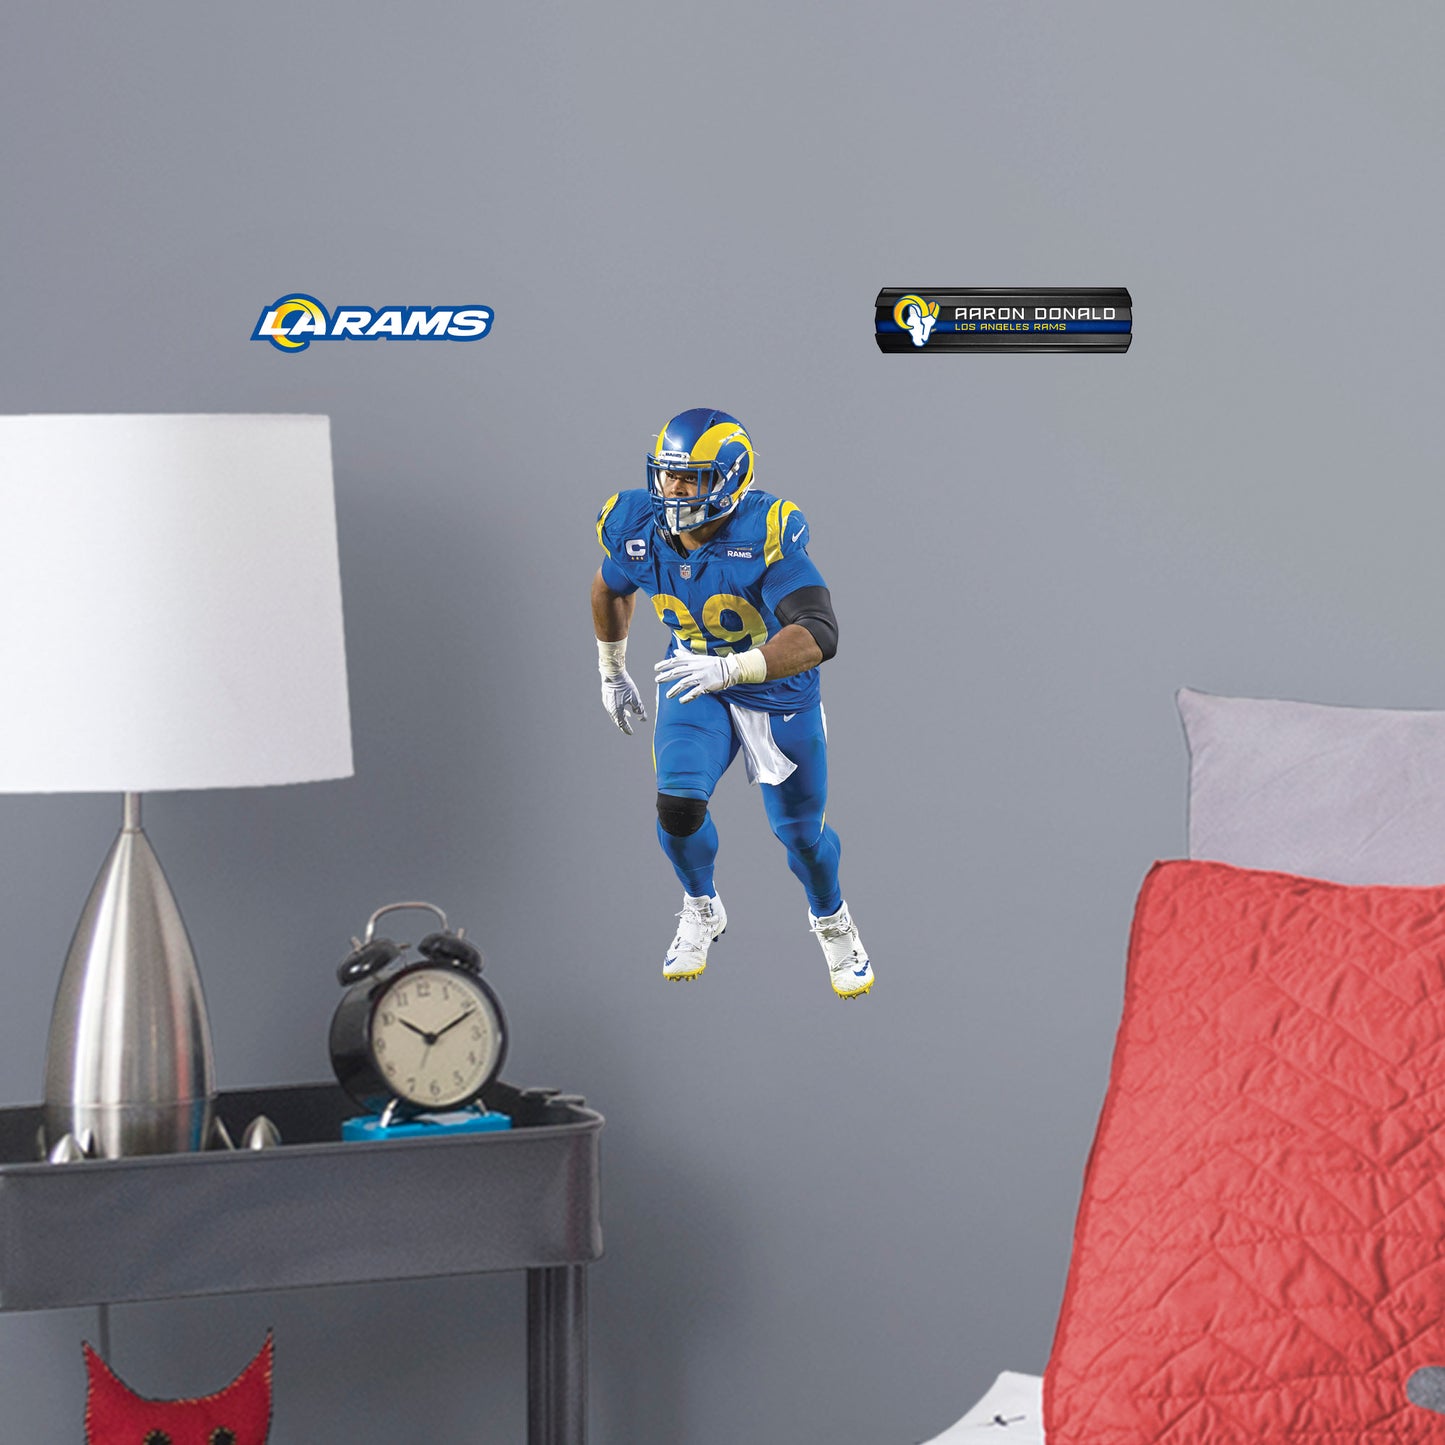 Large Athlete + 2 Decals (8"W x 16"H) Rams fans know and love Aaron Donald as the star defensive tackle from their favorite team and now they can bring home that Los Angeles pride with an Aaron Donald Removable Wall Decal Set! This wall decal is vibrant and durable so you'll be able to stick it and move it over and over again. Go Rams!